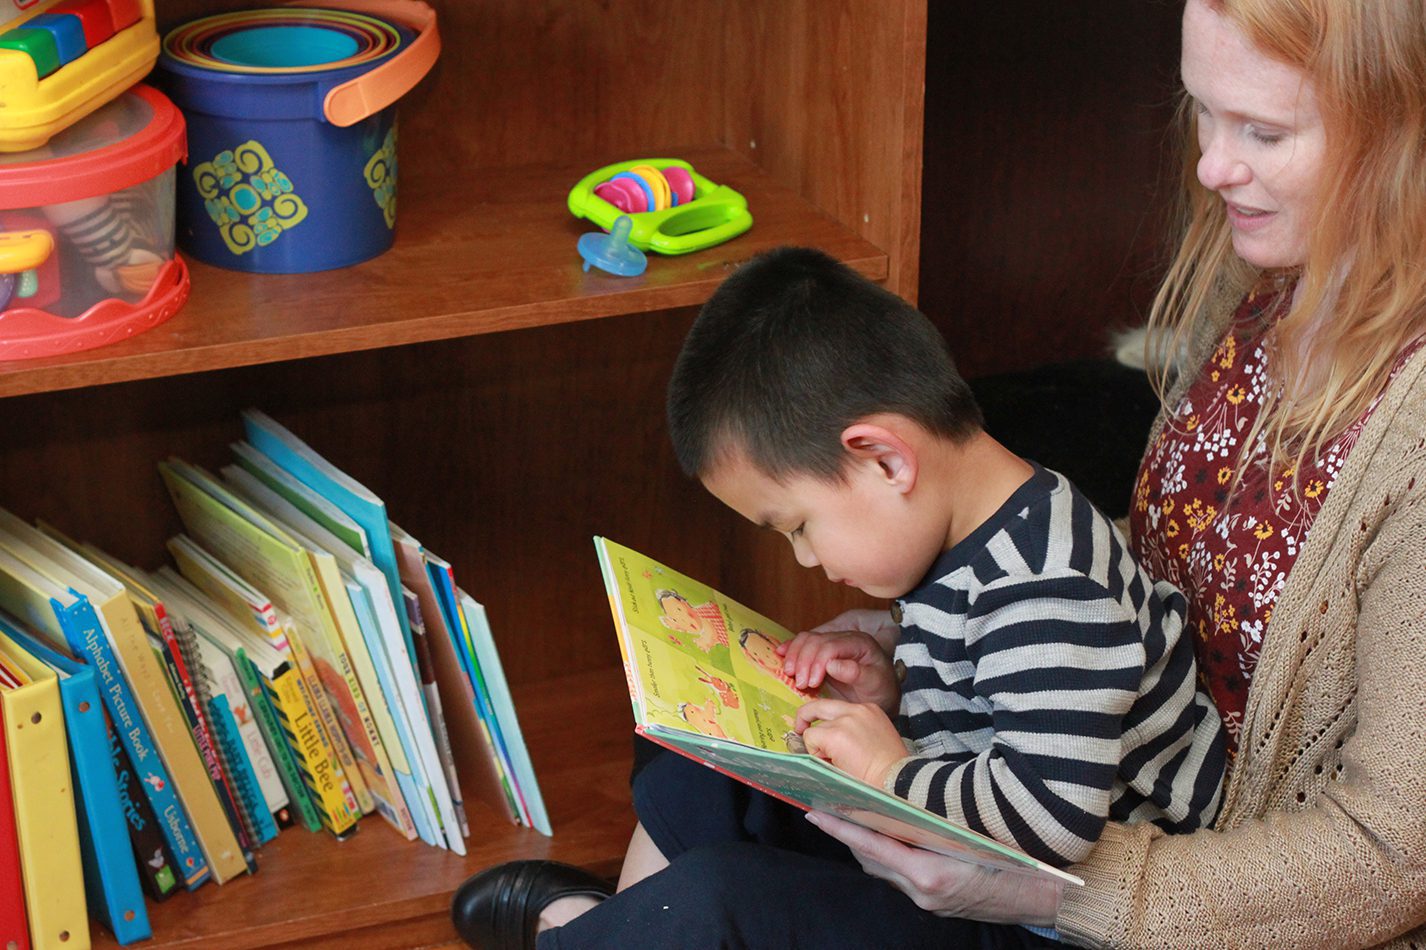 A mother and child sitting on the floor next to a bookcase reading a print/braille book together.